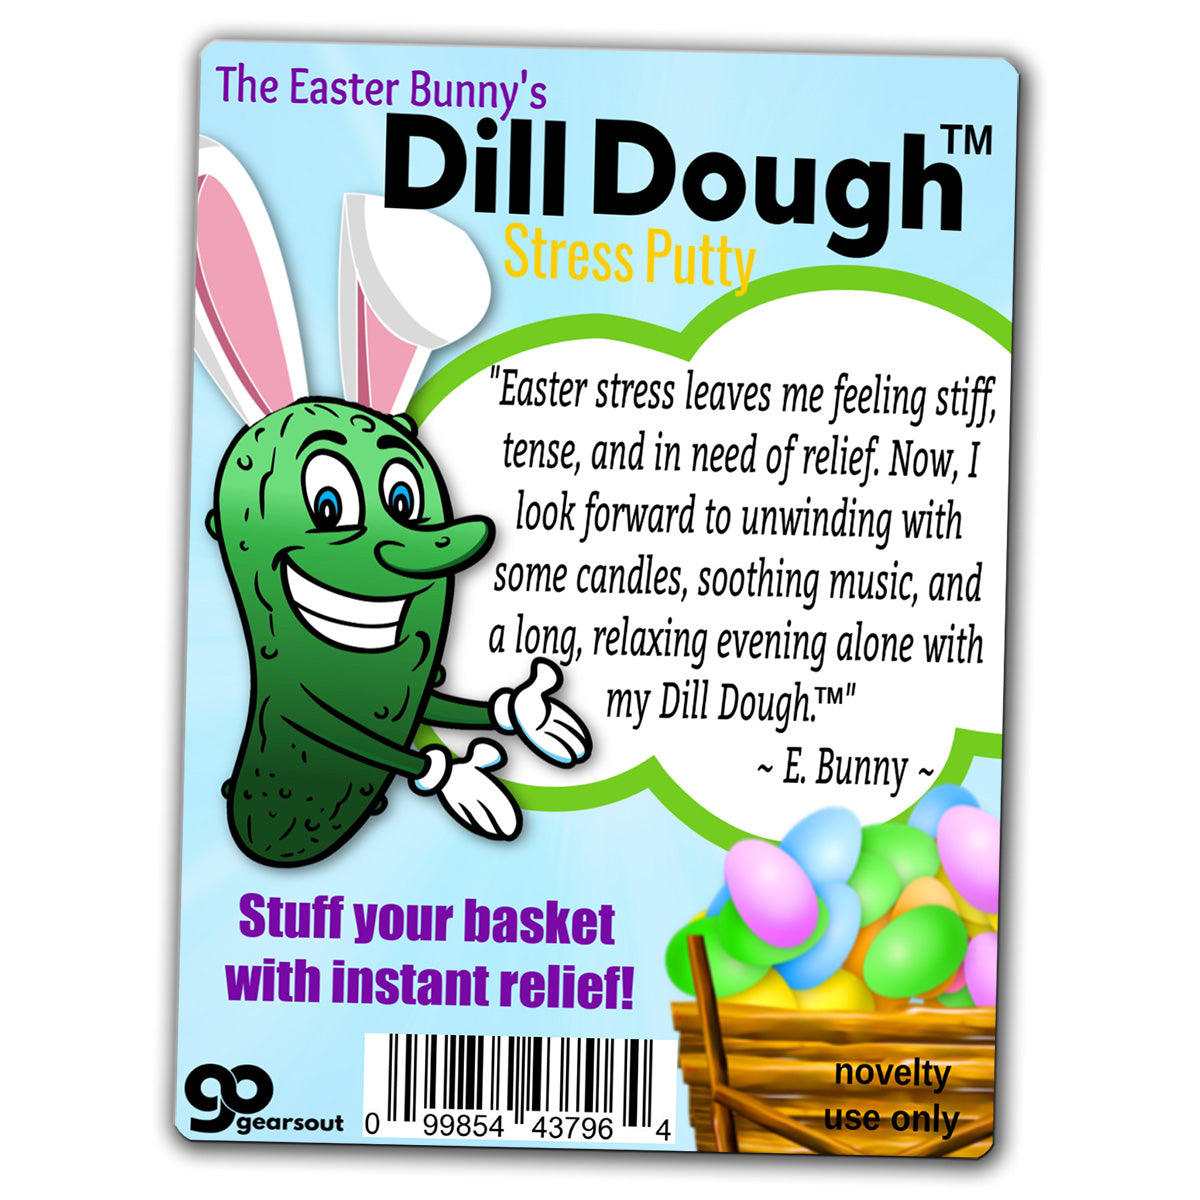 The Easter Bunny's Dill Dough Stress Putty